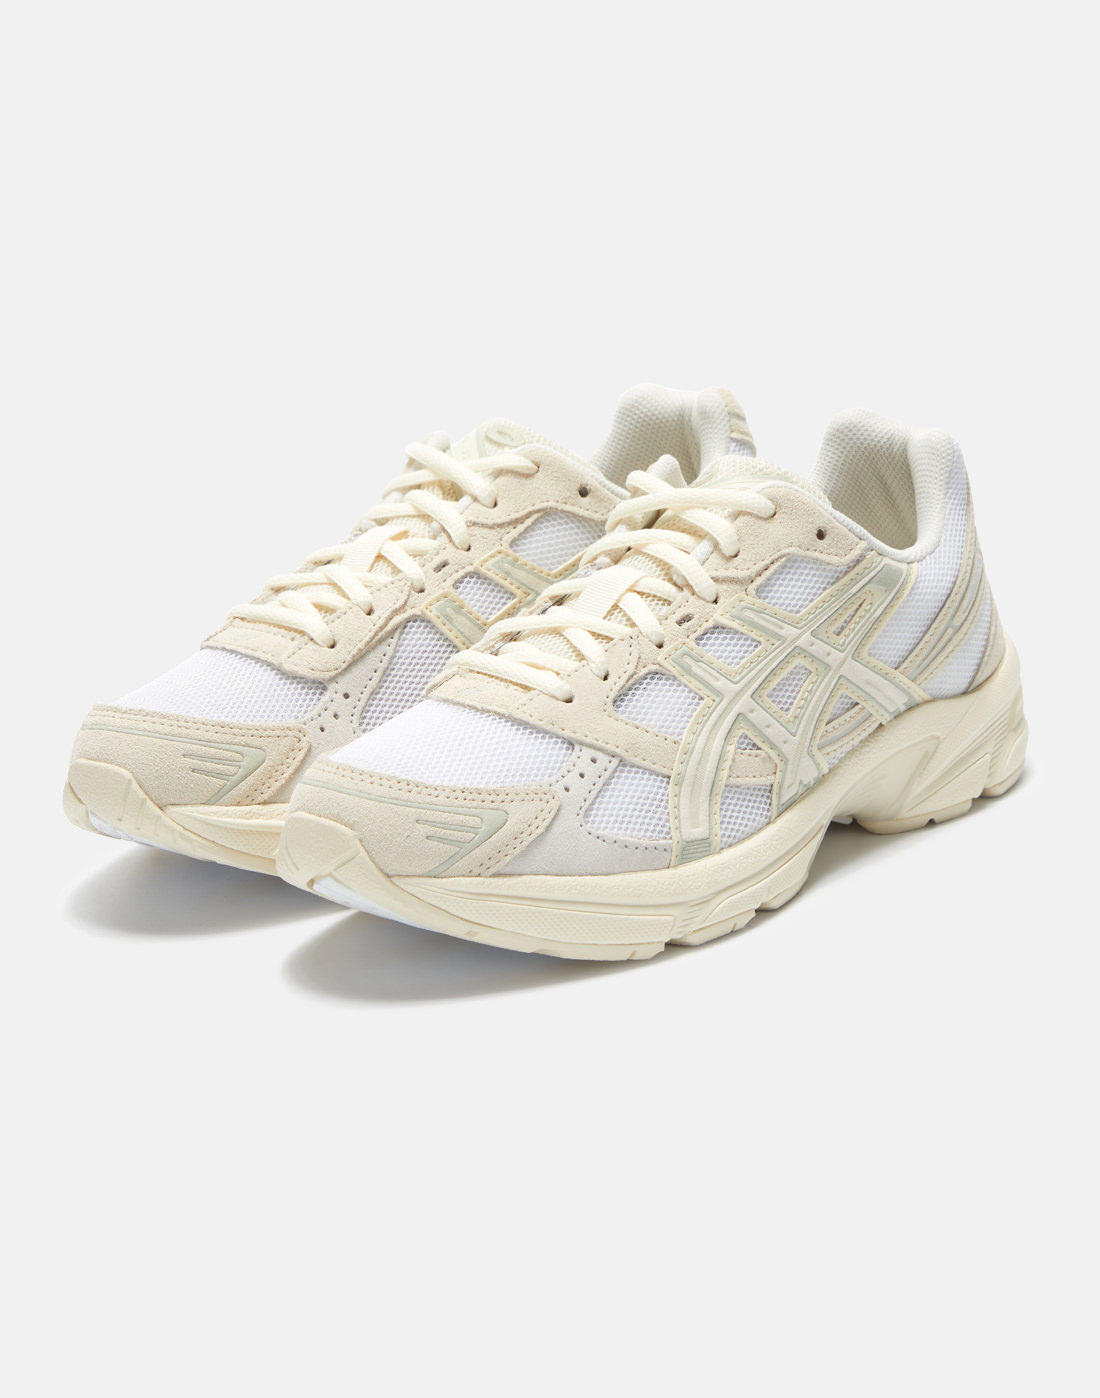 Asics Womens Gel 1130 Trainers - Cream | Life Style Sports IE